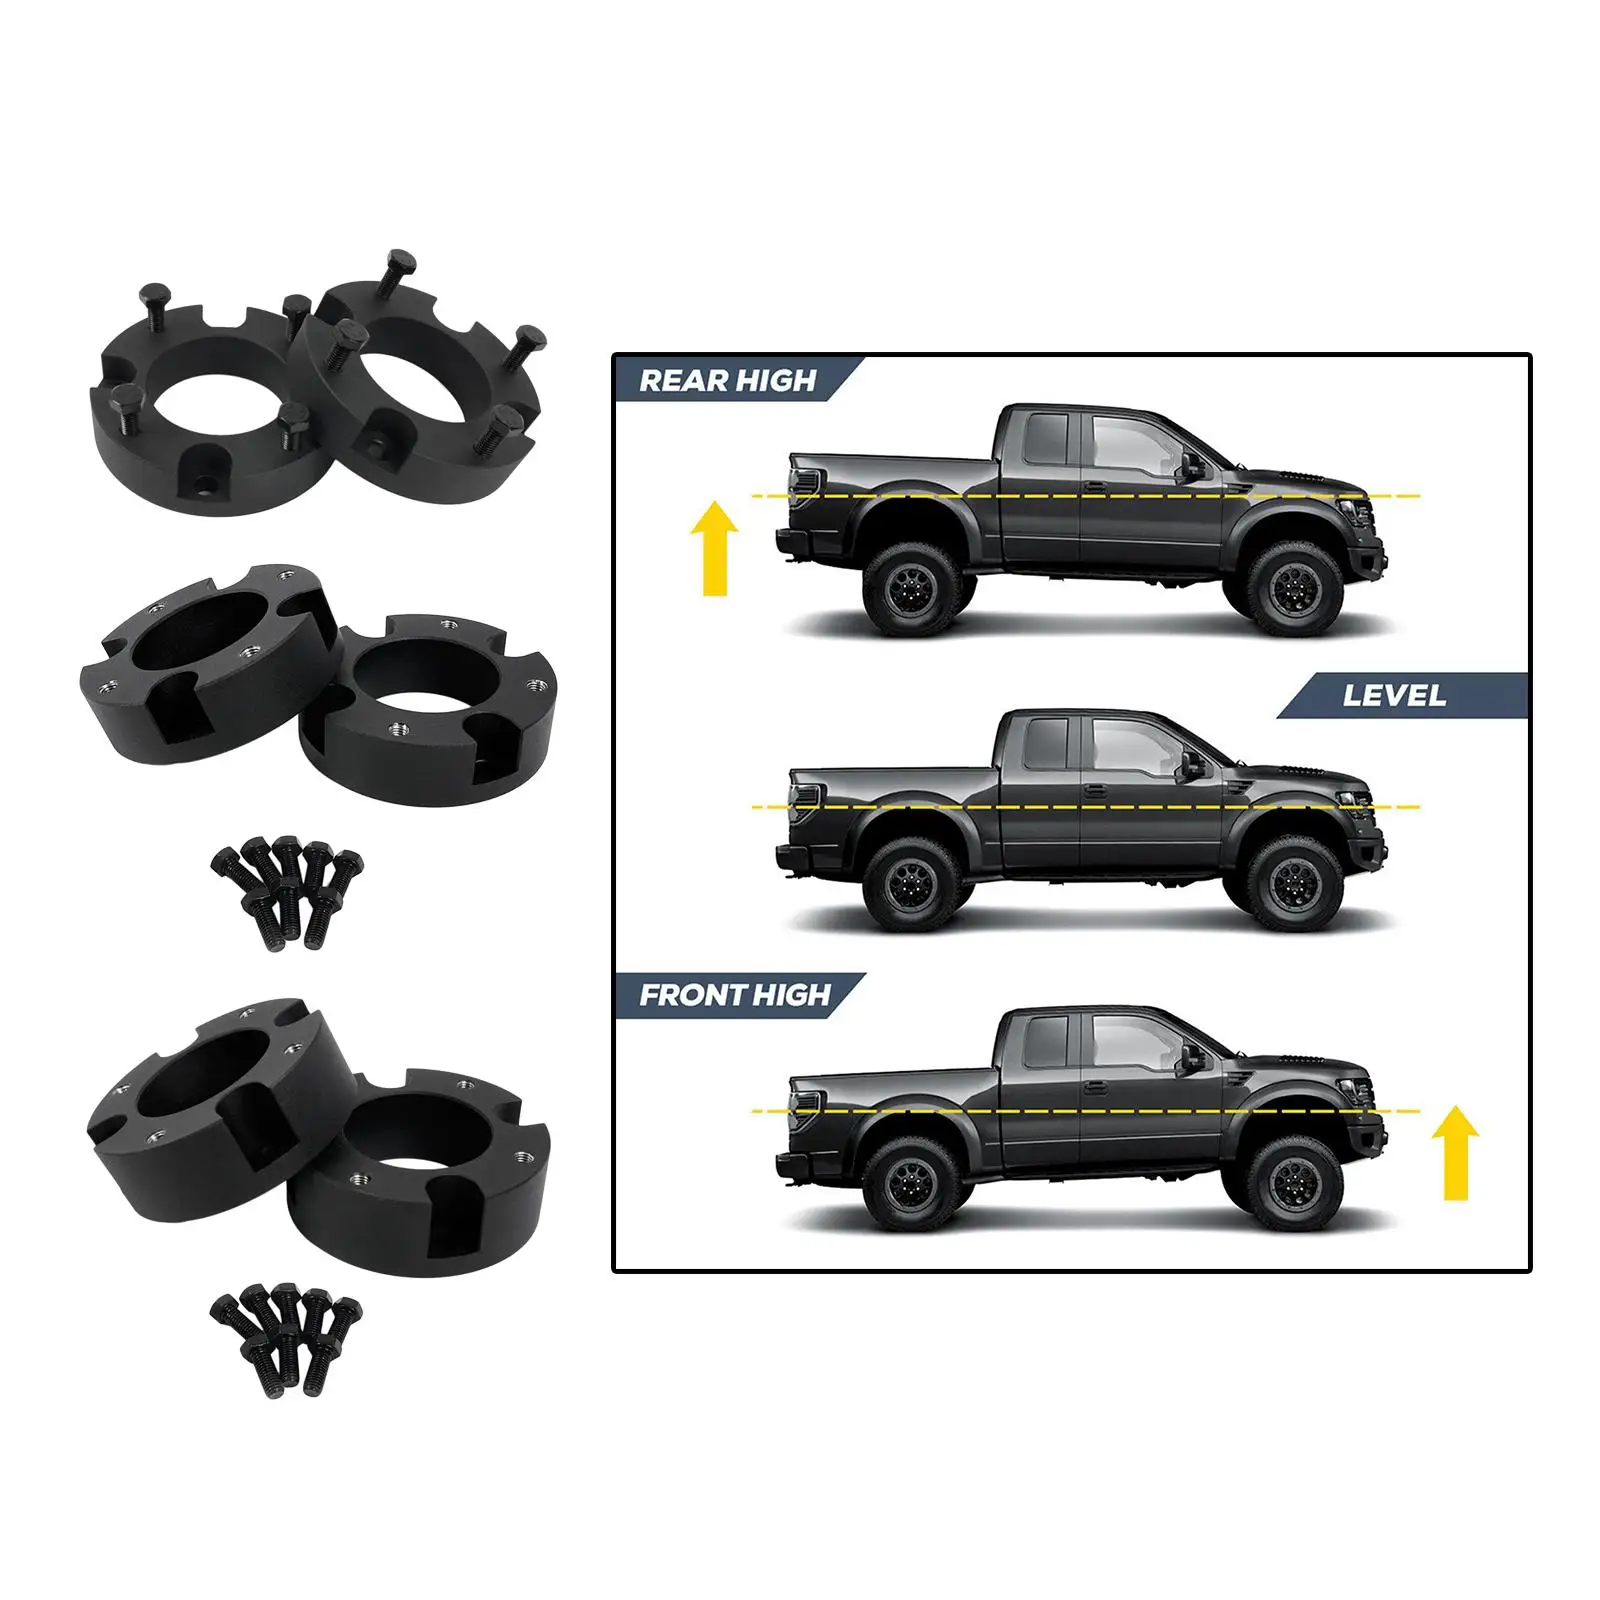 Black Leveling Lift Set Repair Parts Professional Replacement Accessory Aluminum Alloy for Toyota for tundra 4WD 2WD 2007-2019